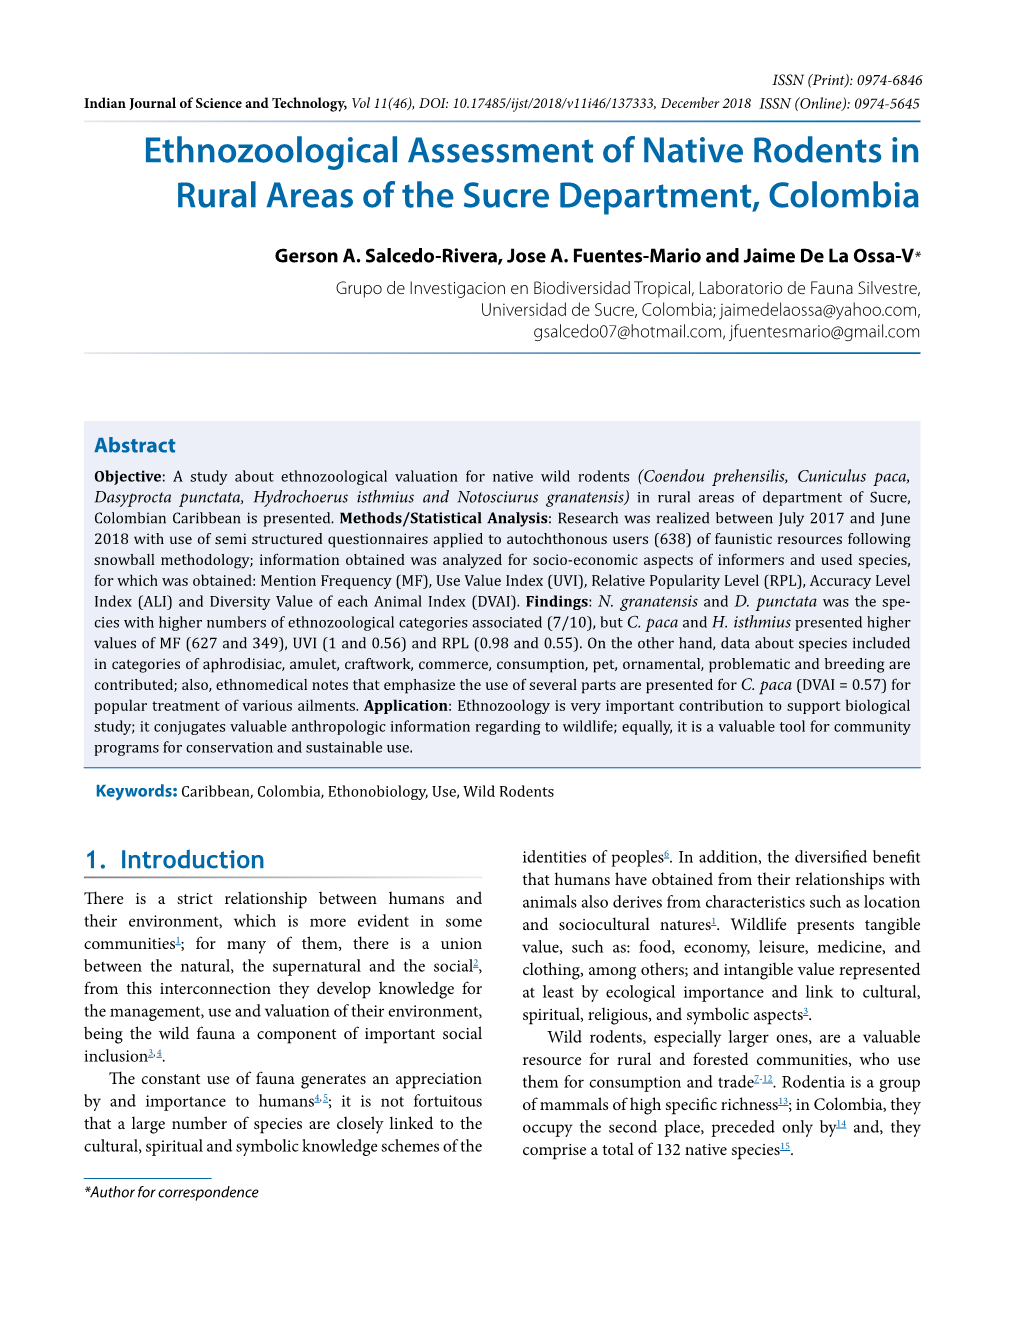 Ethnozoological Assessment of Native Rodents in Rural Areas of the Sucre Department, Colombia